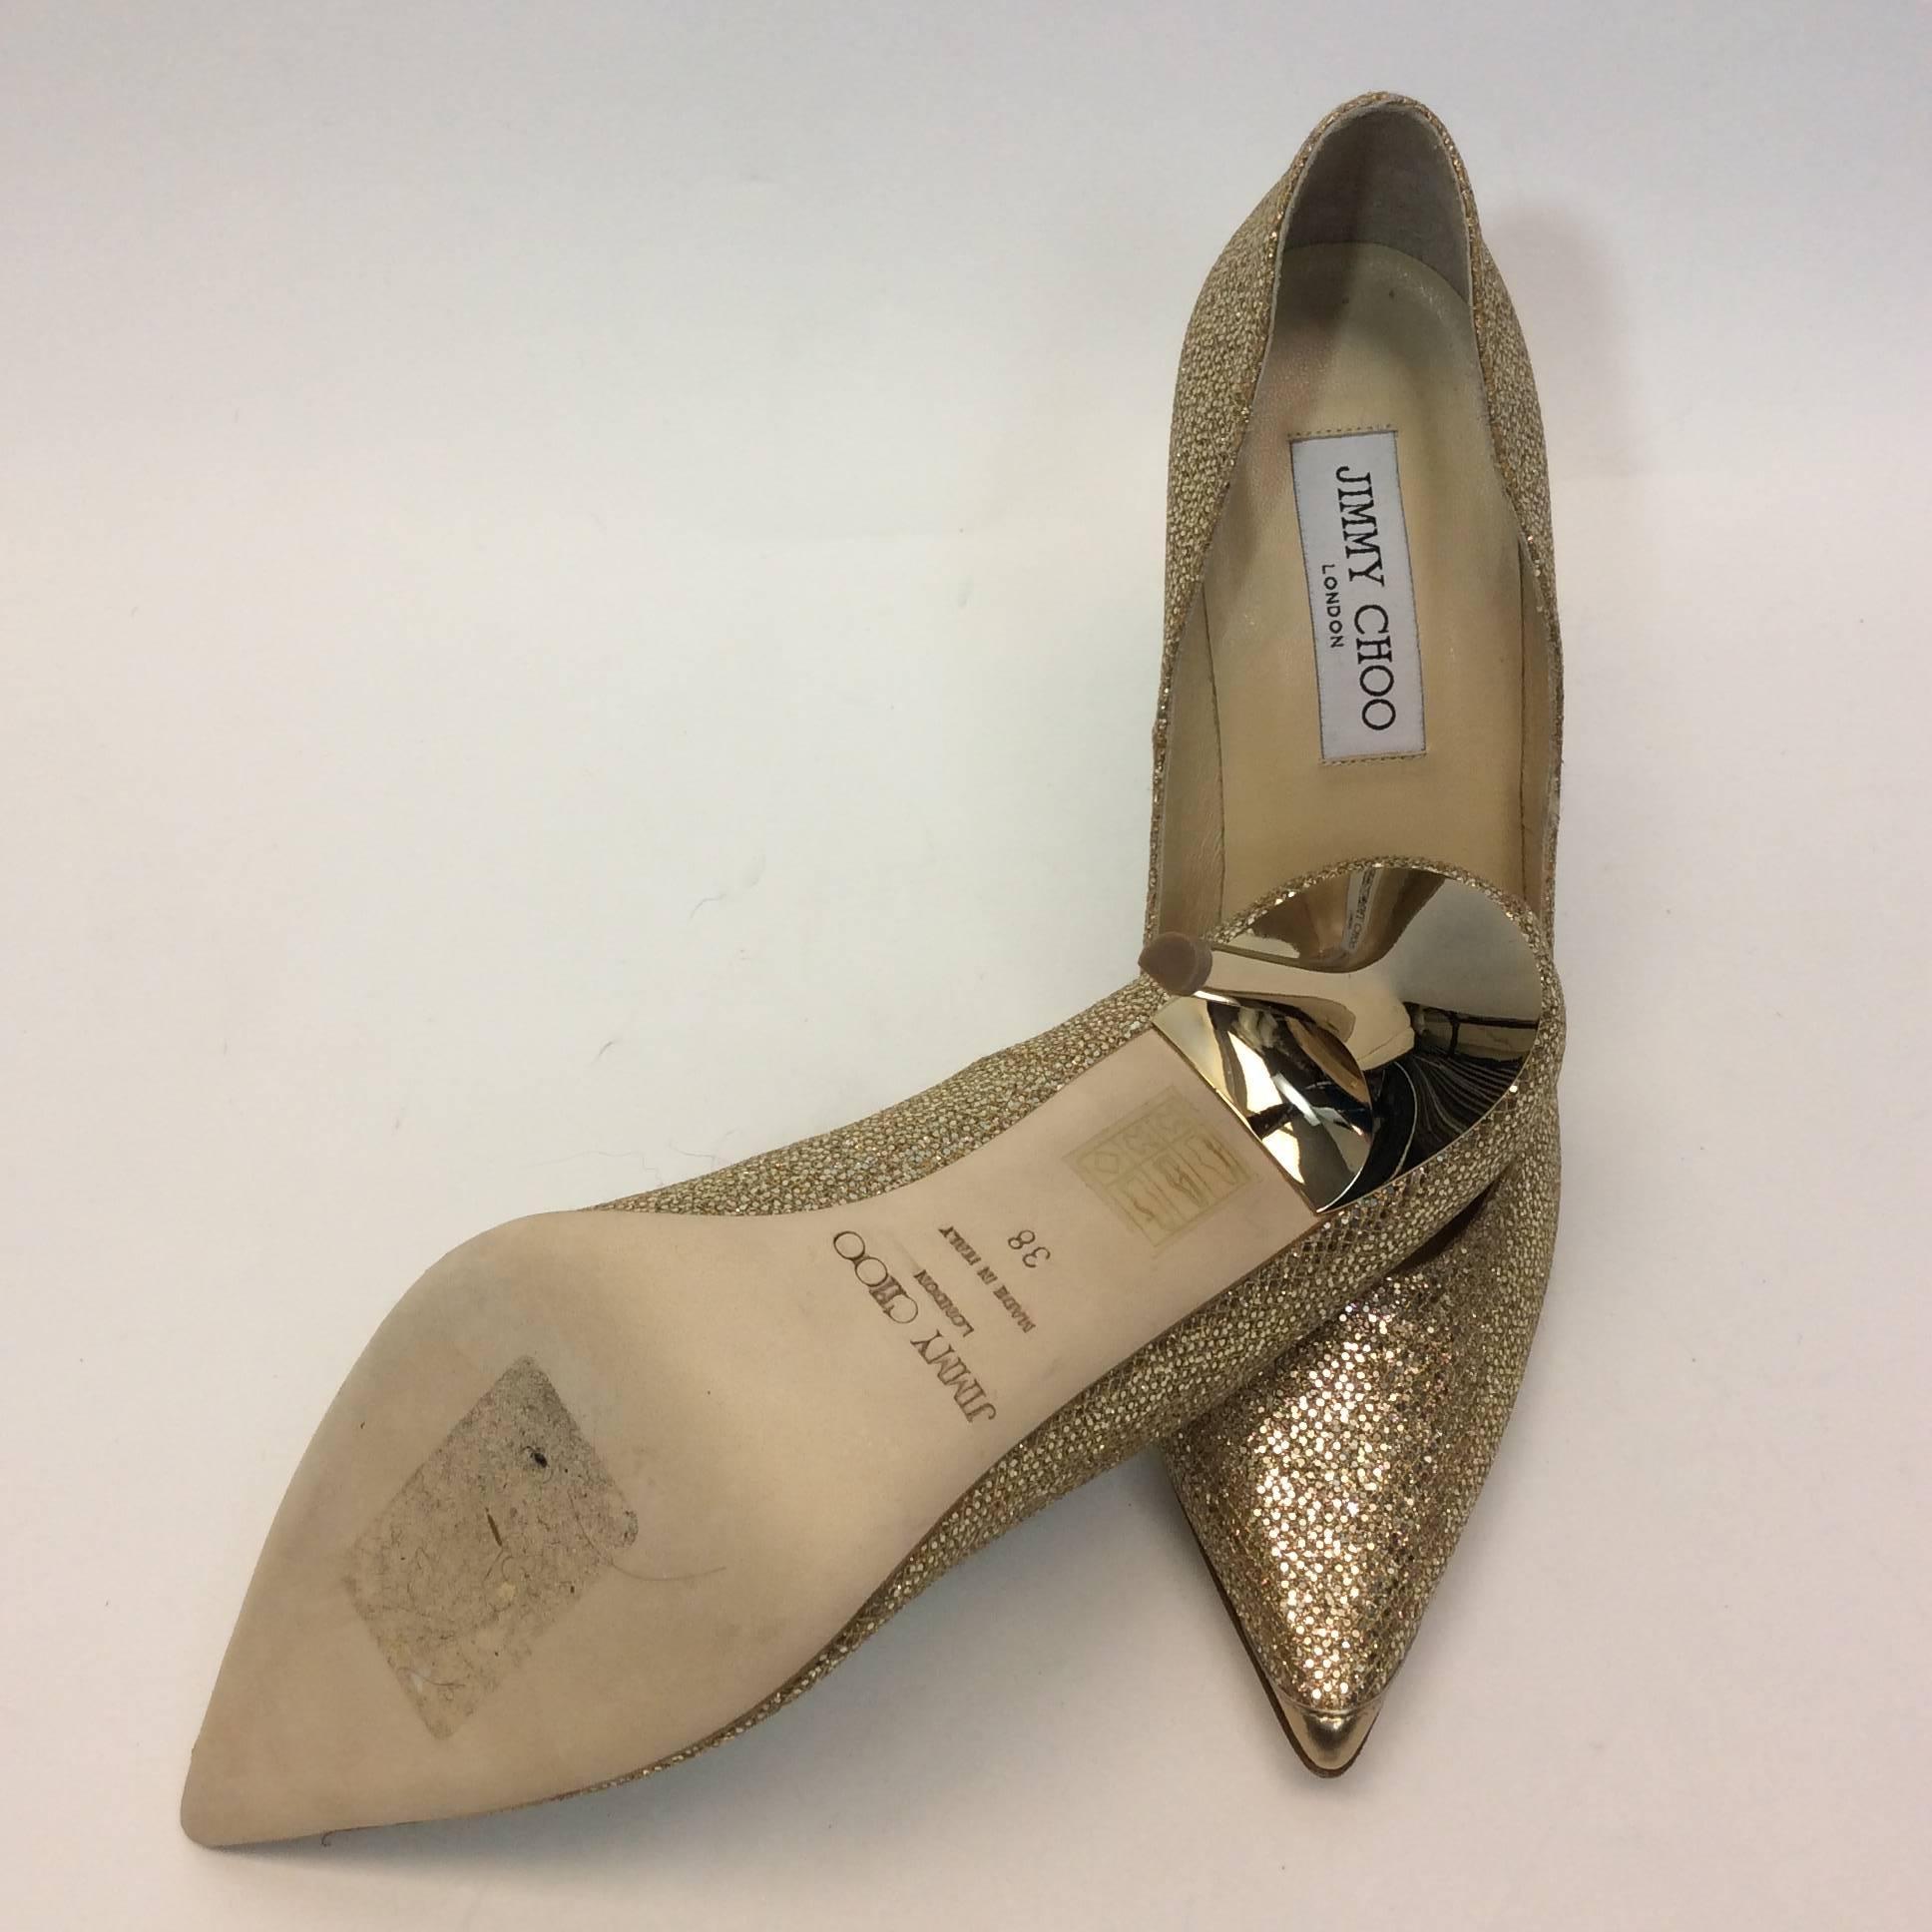 Gold Sequined Pump
4 inch heel
3.5 inch sole width
Reflective gold heel and pointed toe
Size 38 (equates to US 7.5)
Suede sole, woven upper and leather lining